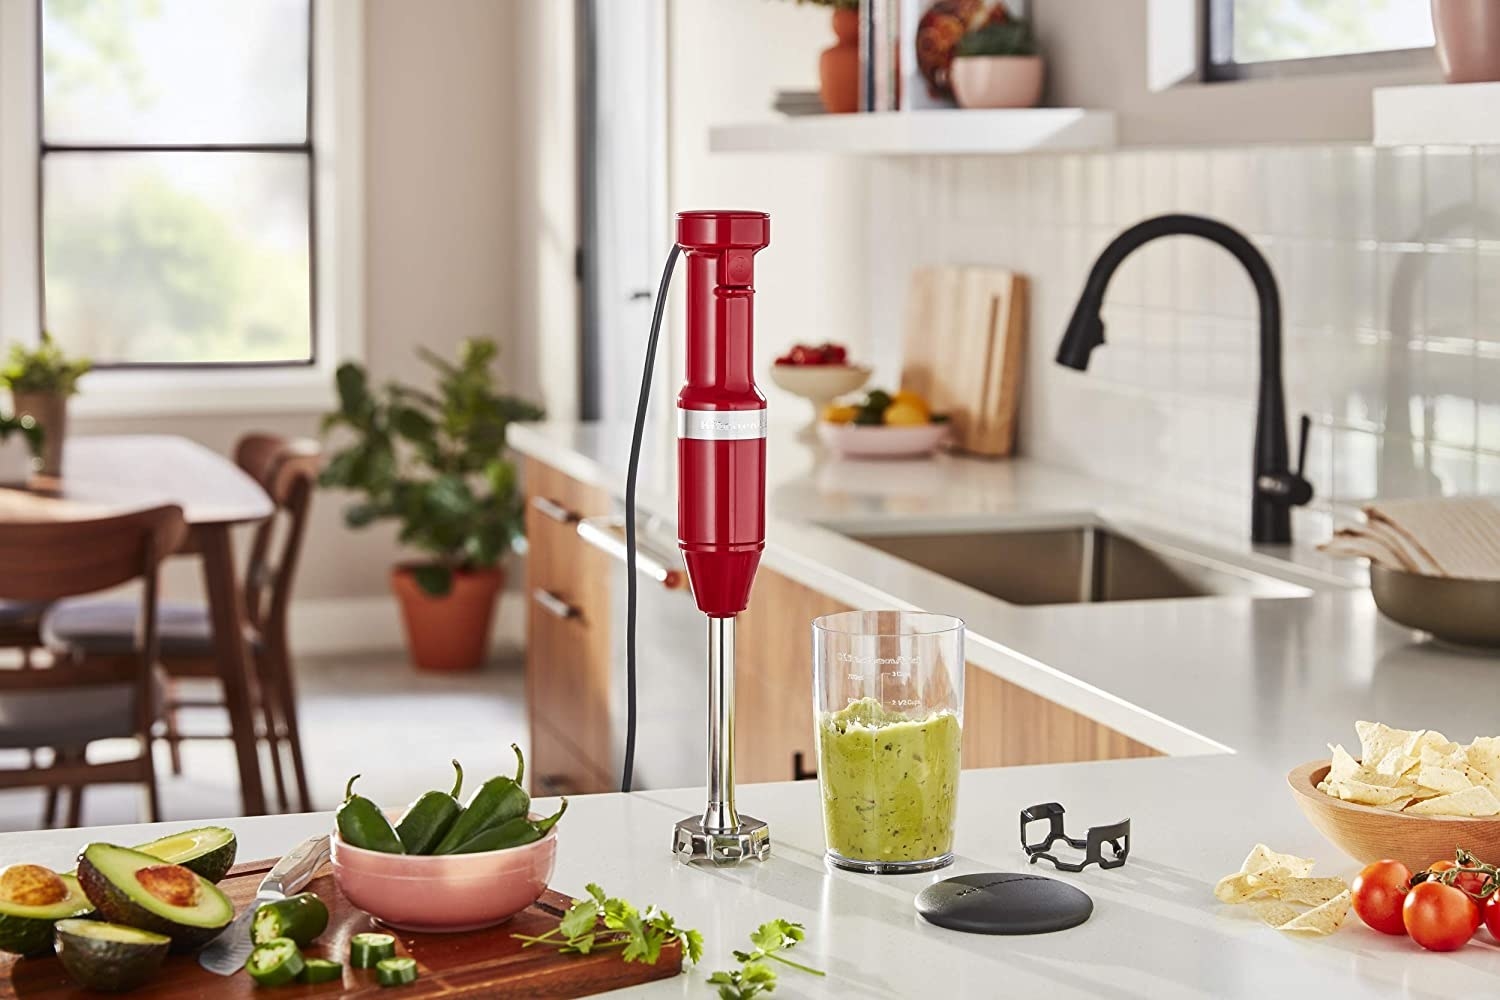 The blender next to a cup of guacamole on a counter